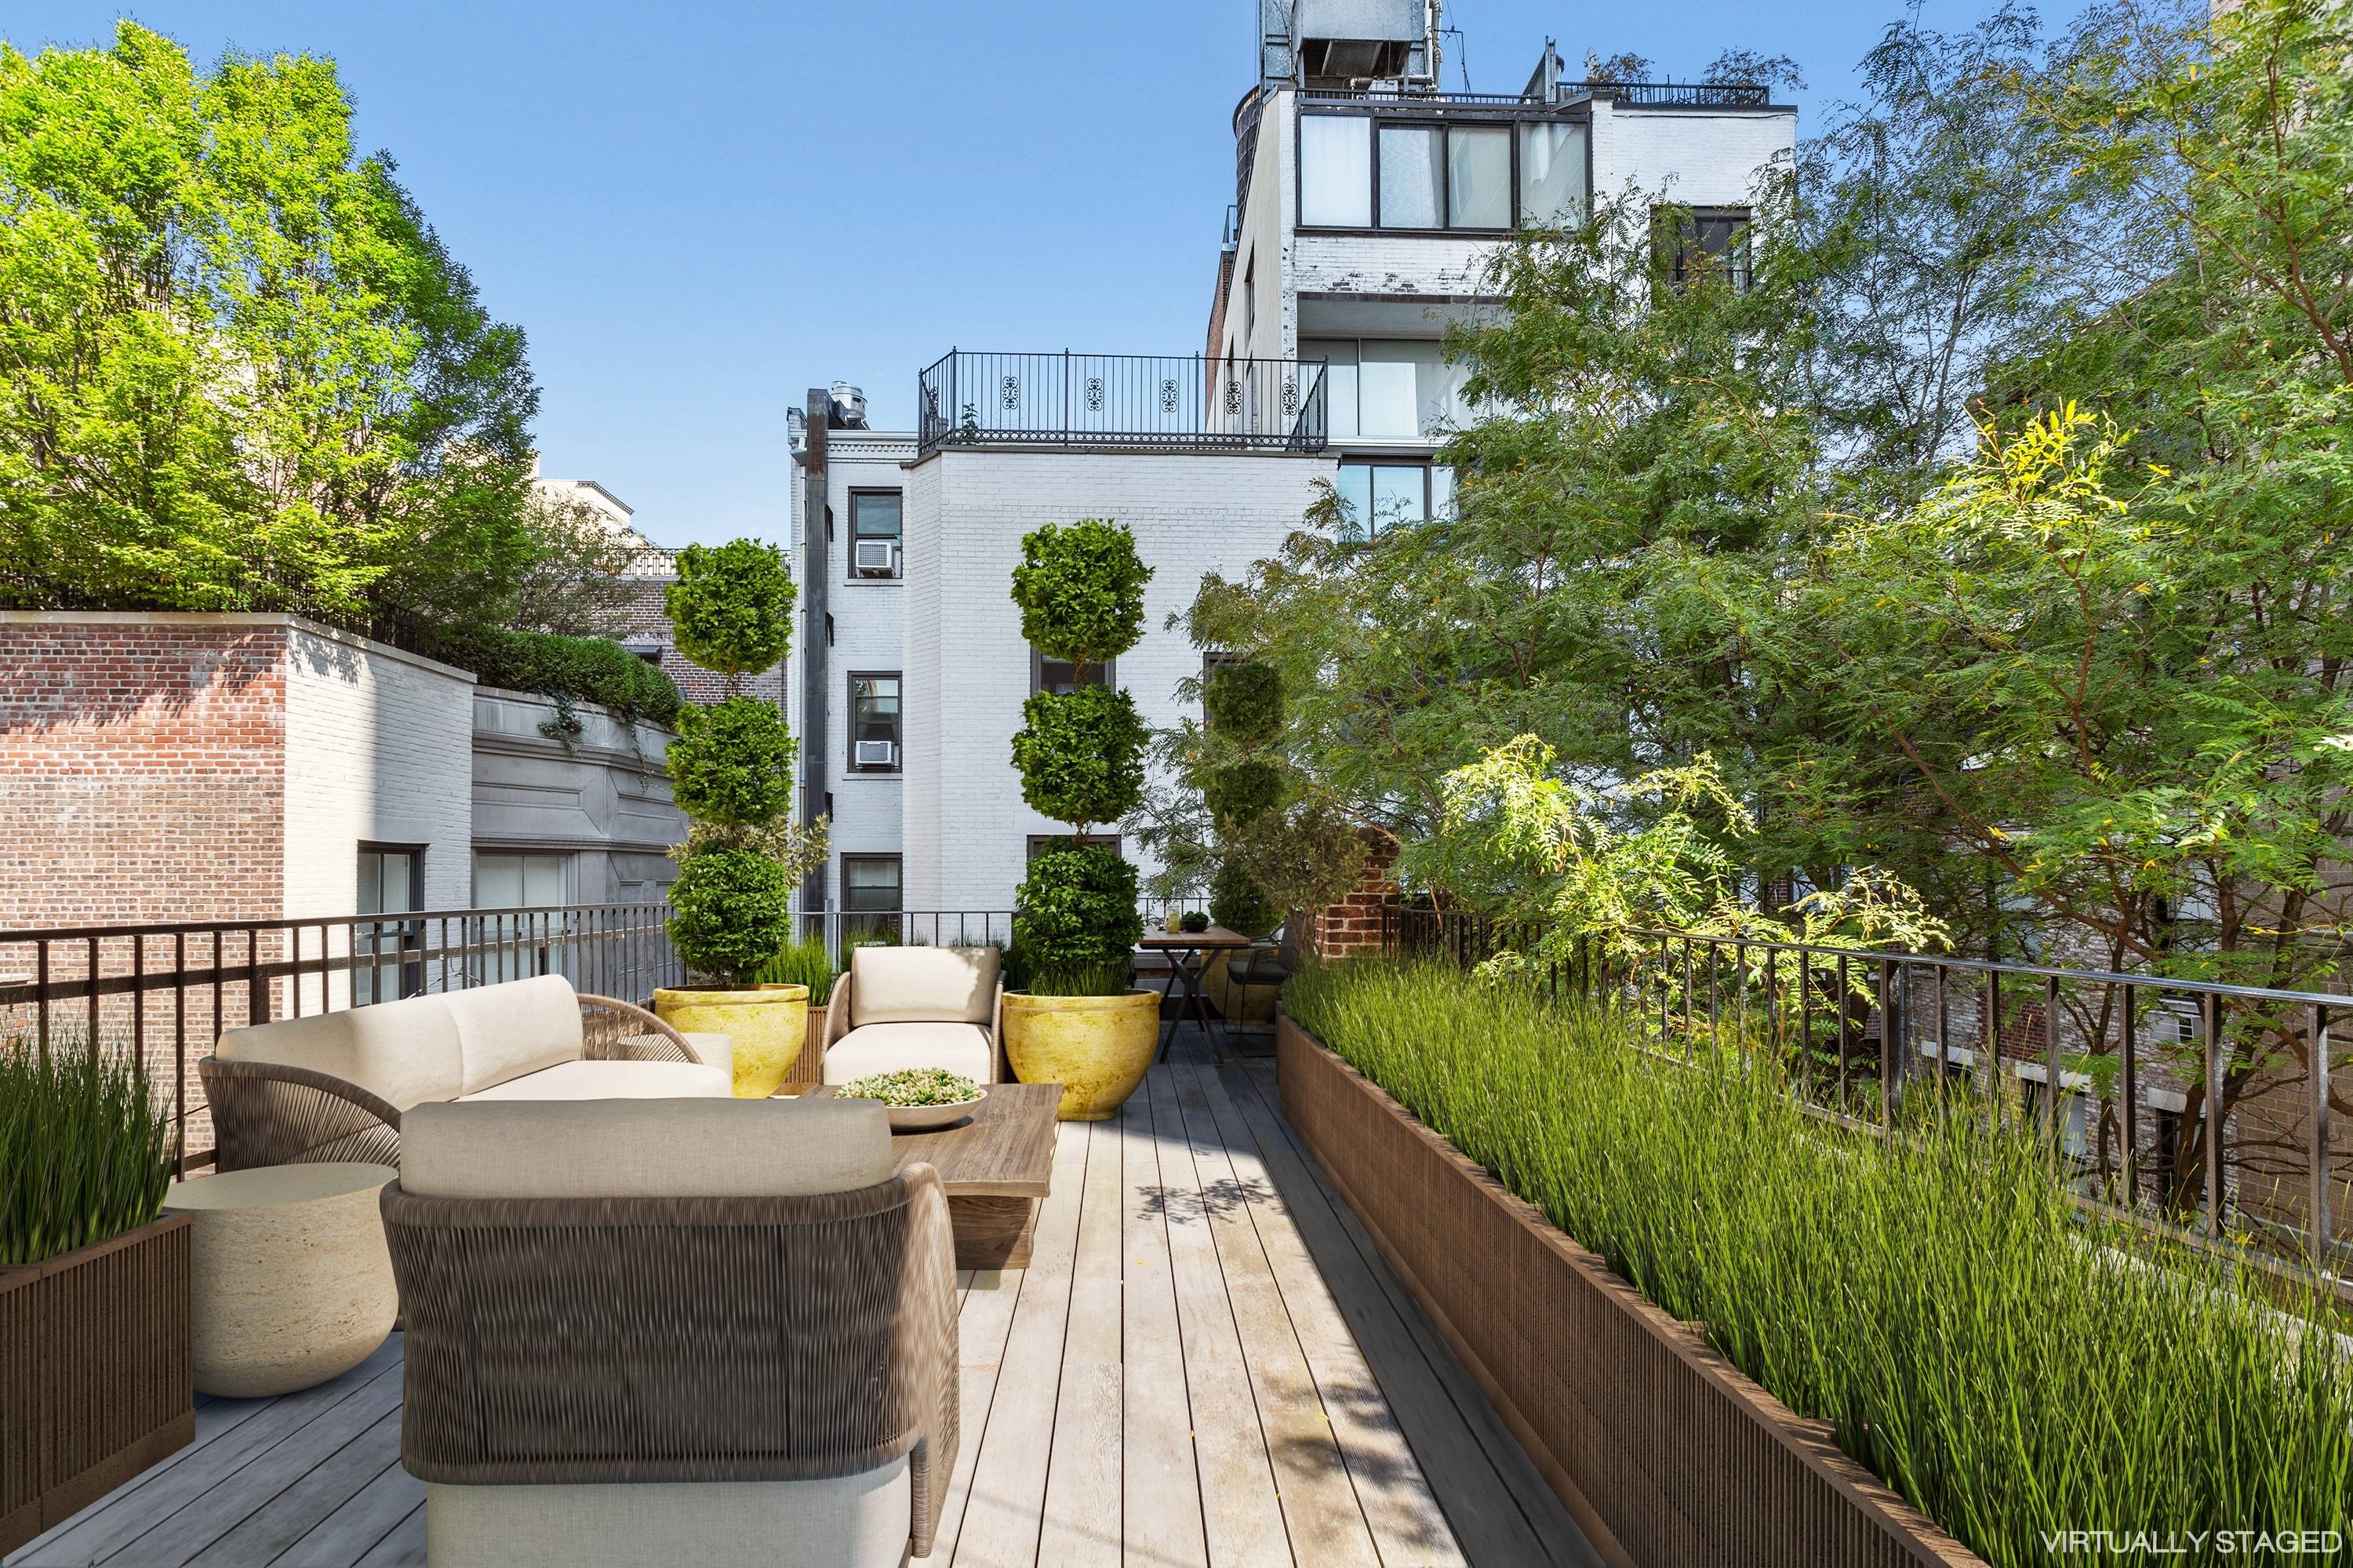 Investor's Condo apartment with Tenant in place Beautiful sunny lofty renovated full high floor with a 370 SF terrace in stately 1906 Limestone TH mansion that has been converted to ...